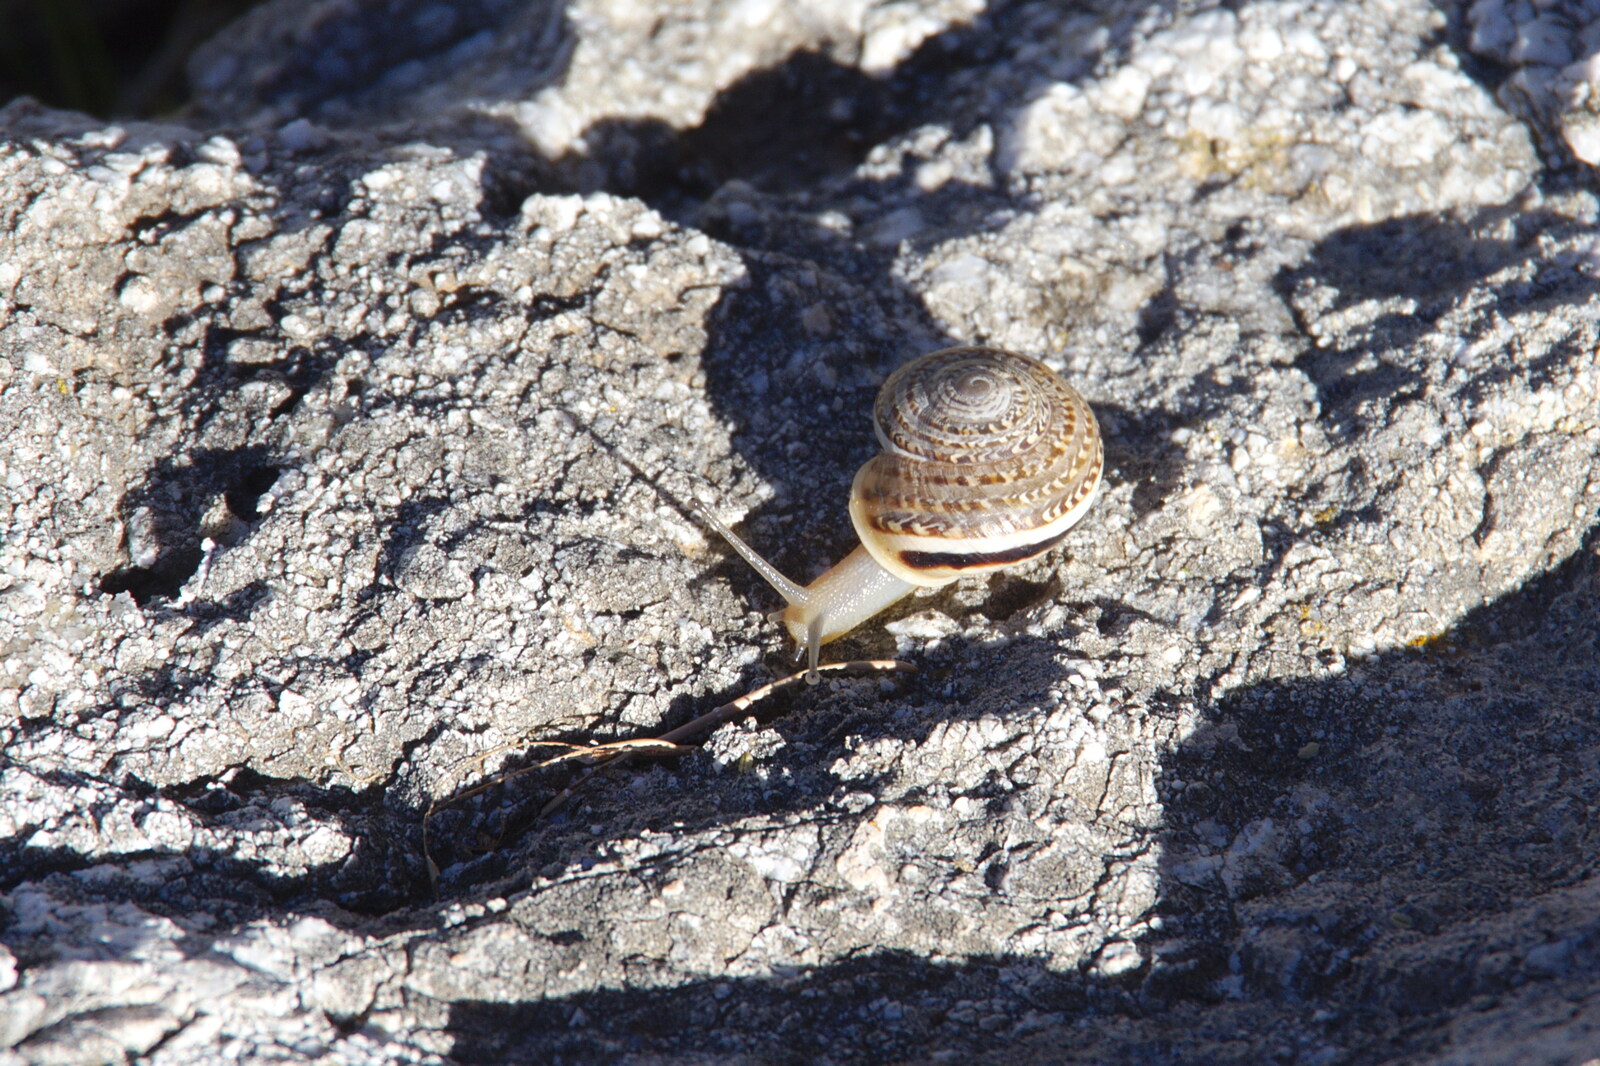 Spanish snail from A Walk up a Hill, Paella on the Beach and Granada, Andalusia, Spain - 19th April 2018